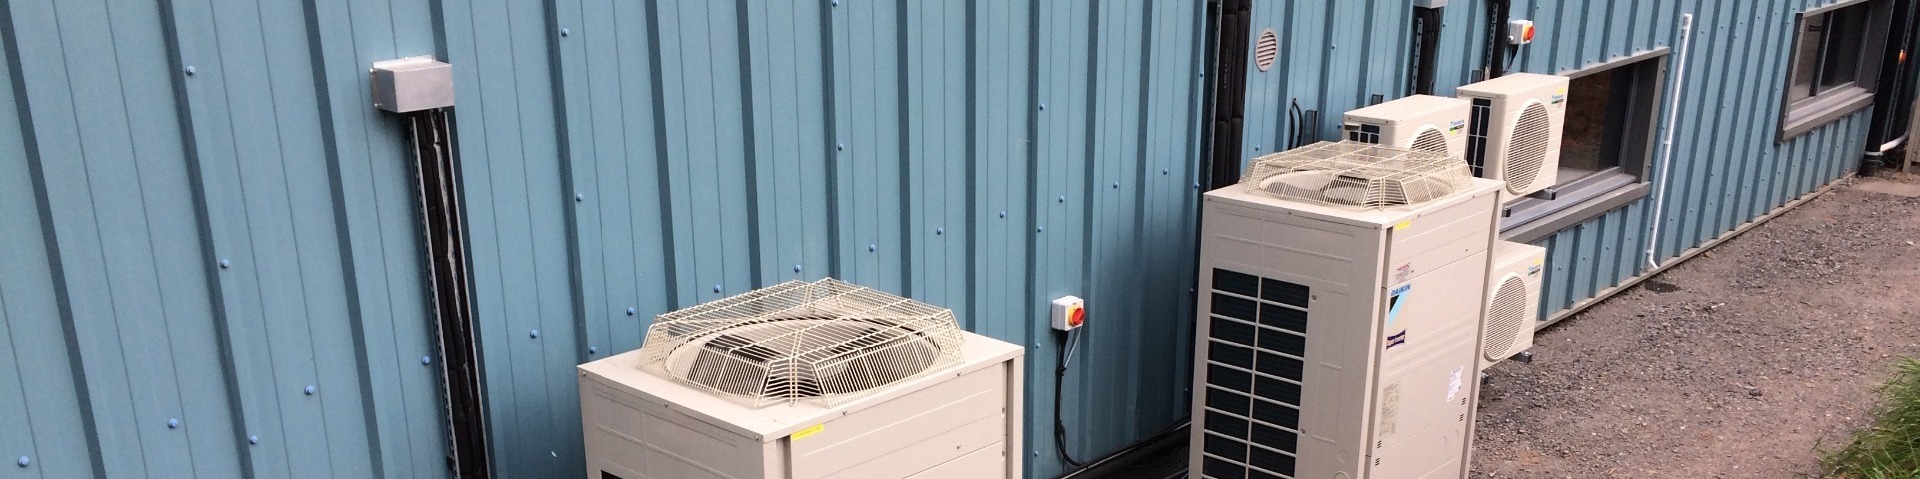 AMS Exeter Air Conditioning Installation